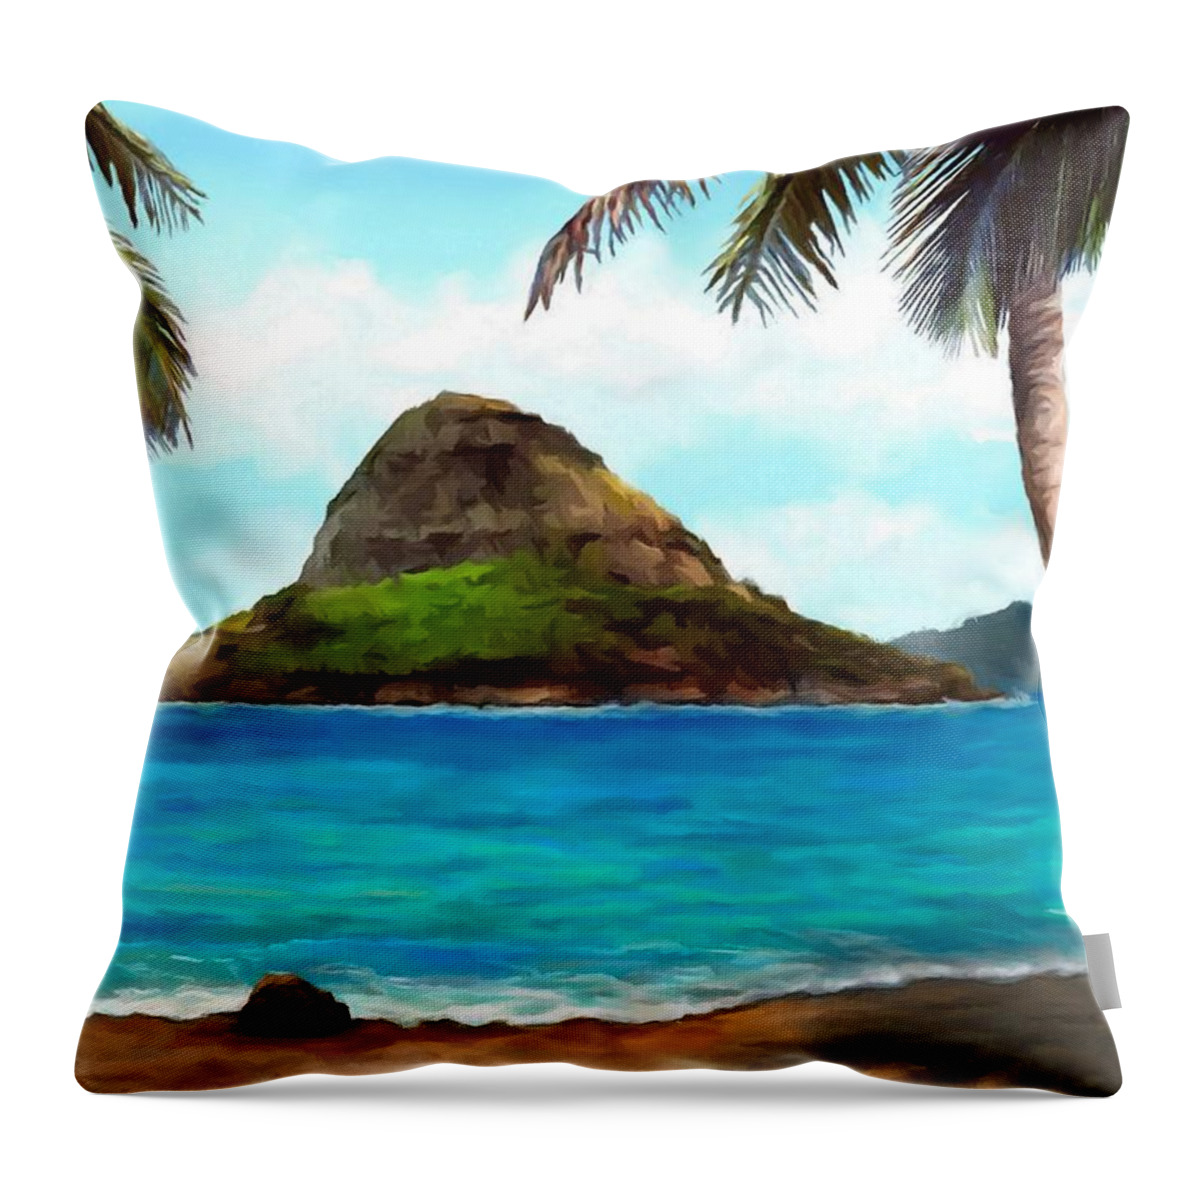 Chinaman's Hat Throw Pillow featuring the painting Chinaman's Hat Hawaii by Stephen Jorgensen